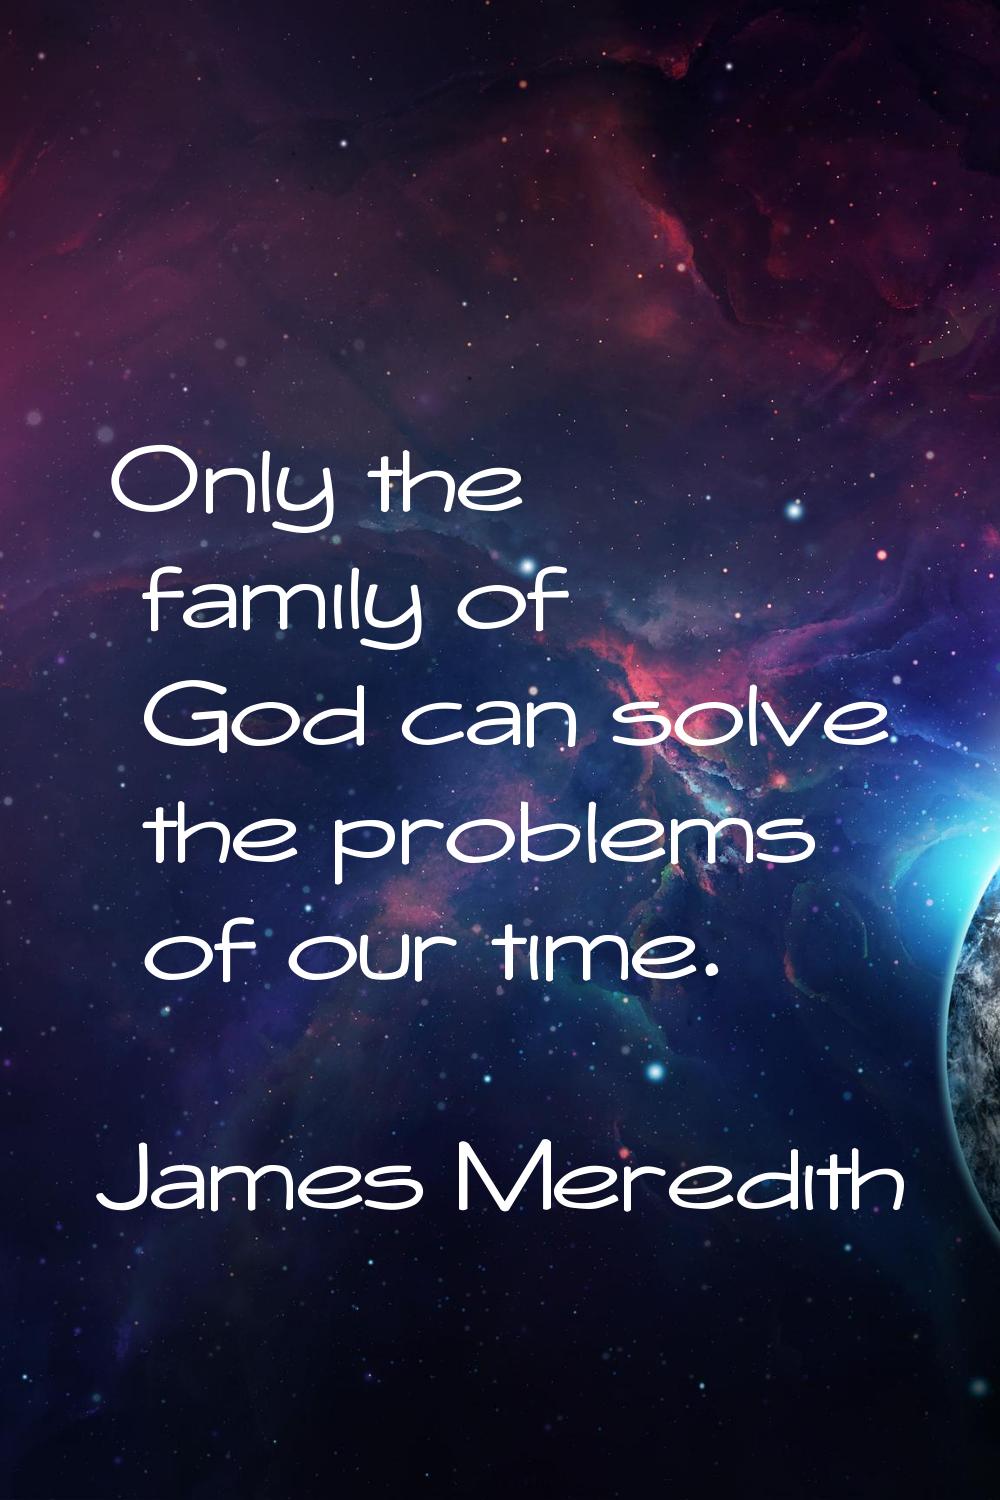 Only the family of God can solve the problems of our time.